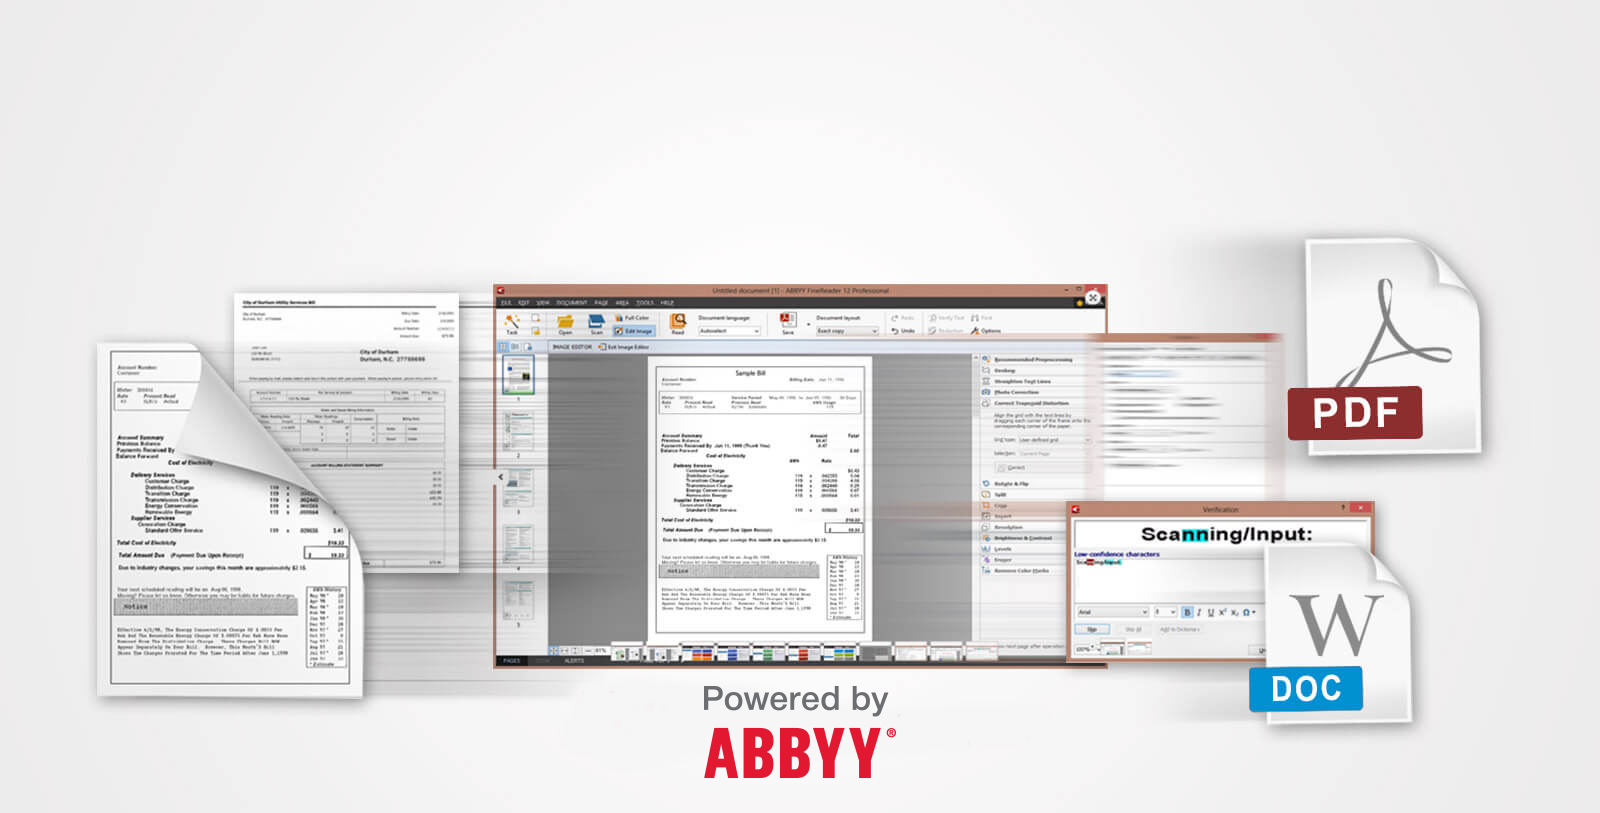 ABBYY FineReader Sprint help you easy to convert the document into searchable and editable